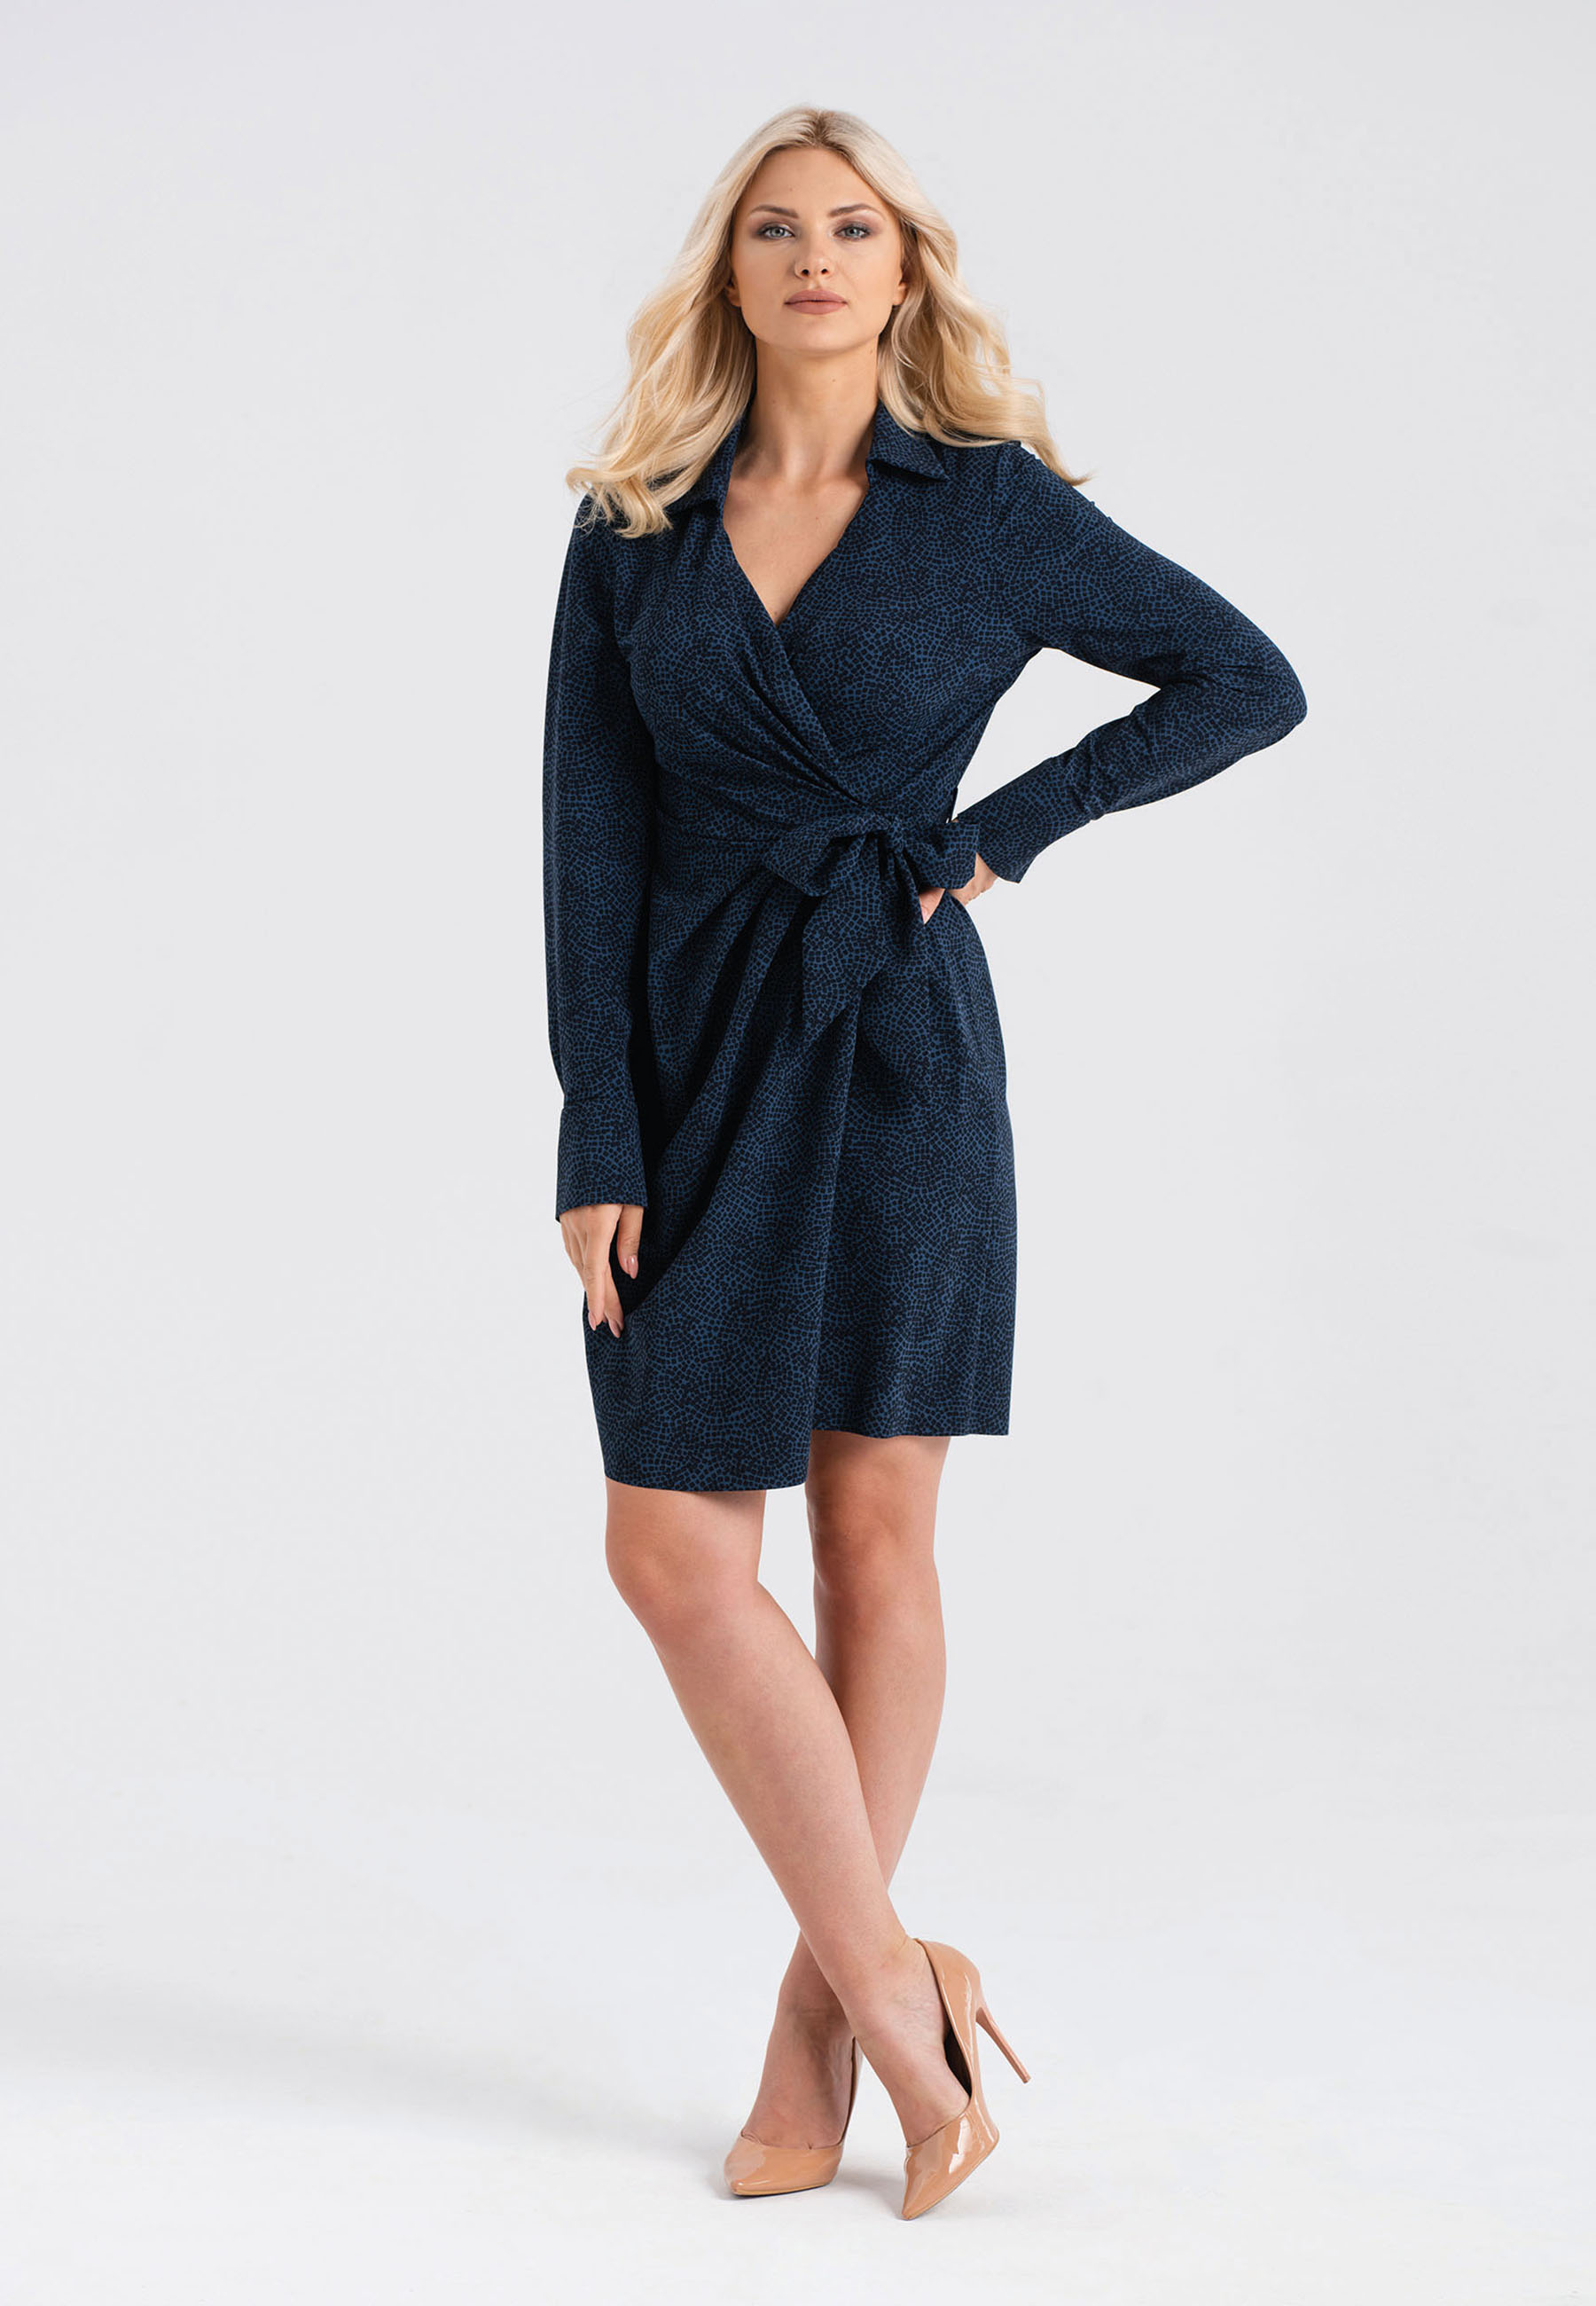 Levně Look Made With Love Woman's Dress 743 Beatrice Navy Blue